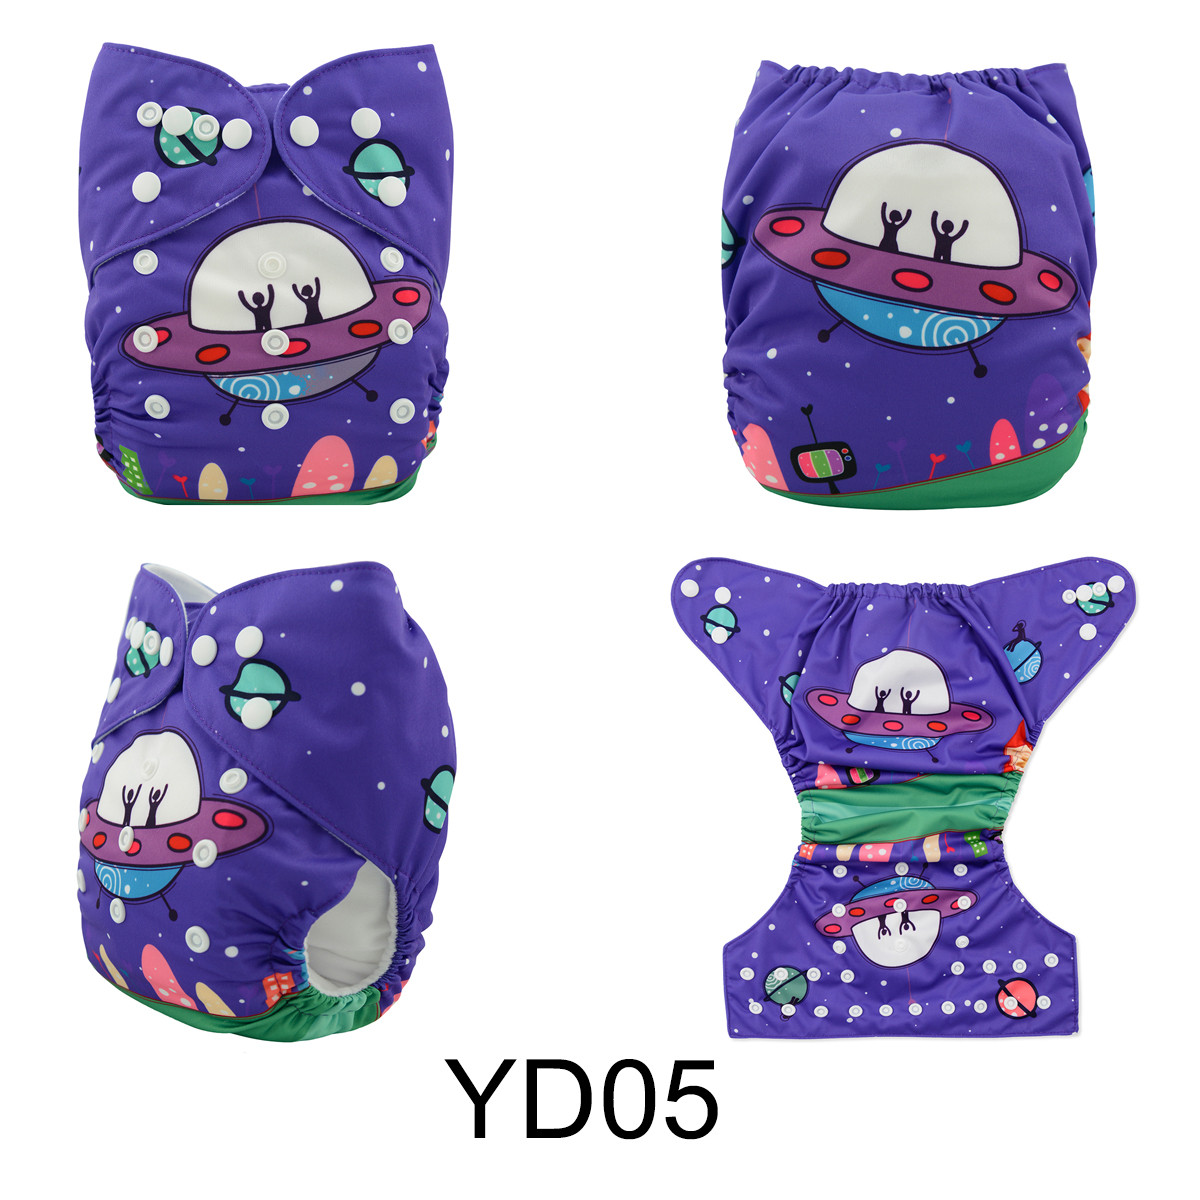 Quality 1 Alva Baby Positioning Digital Printing Cloth Diaper+ 1 Insert YD05 for sale